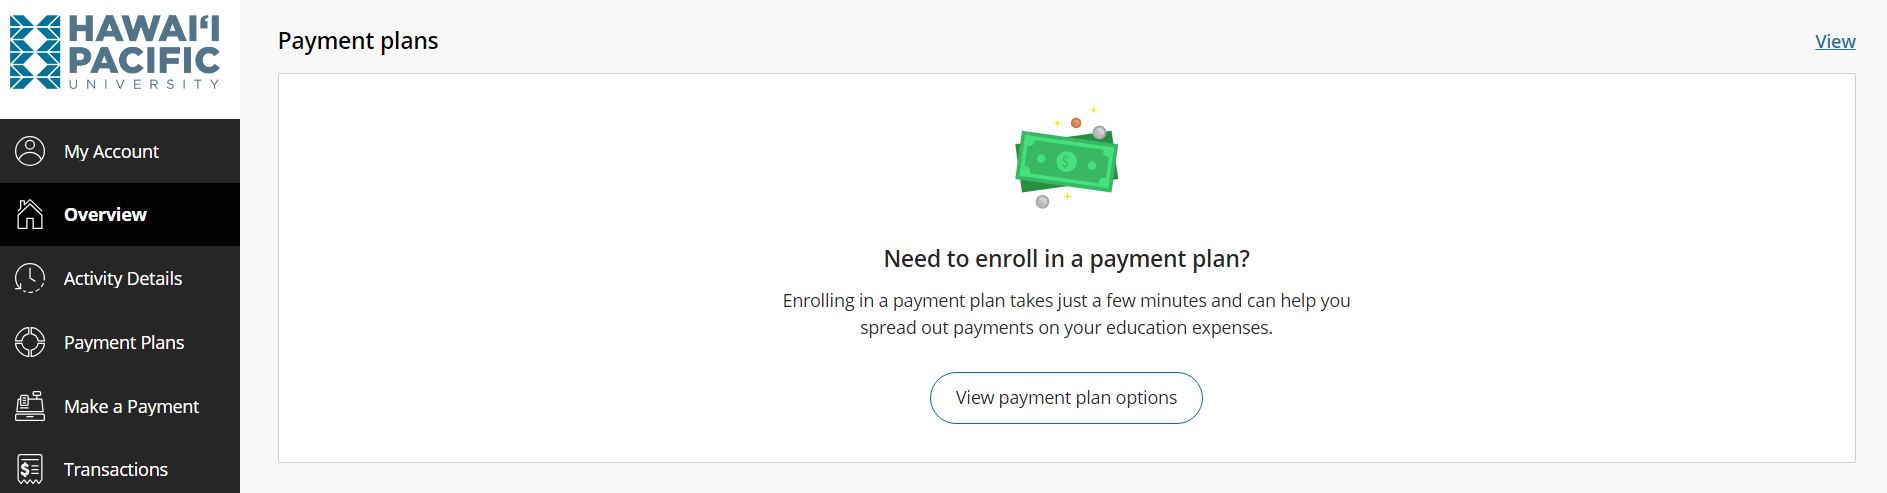 image of the payment portal; click on view payment plan options